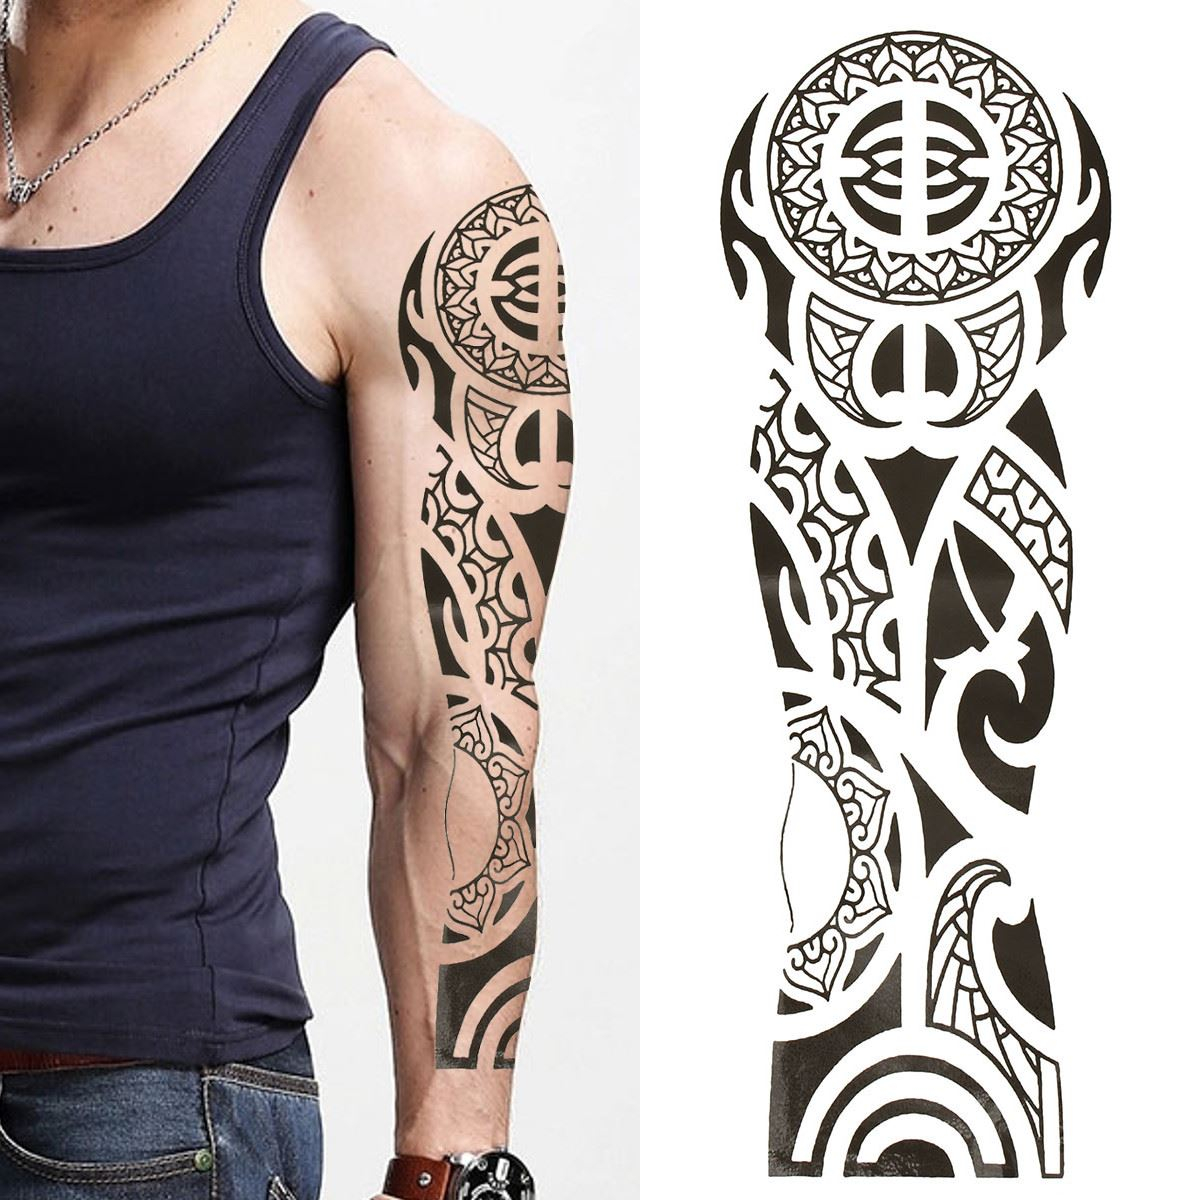 Temporary Tattoos Sticker Large Full Arm Sleeve Waterproof 3d Makeup with regard to size 1200 X 1200